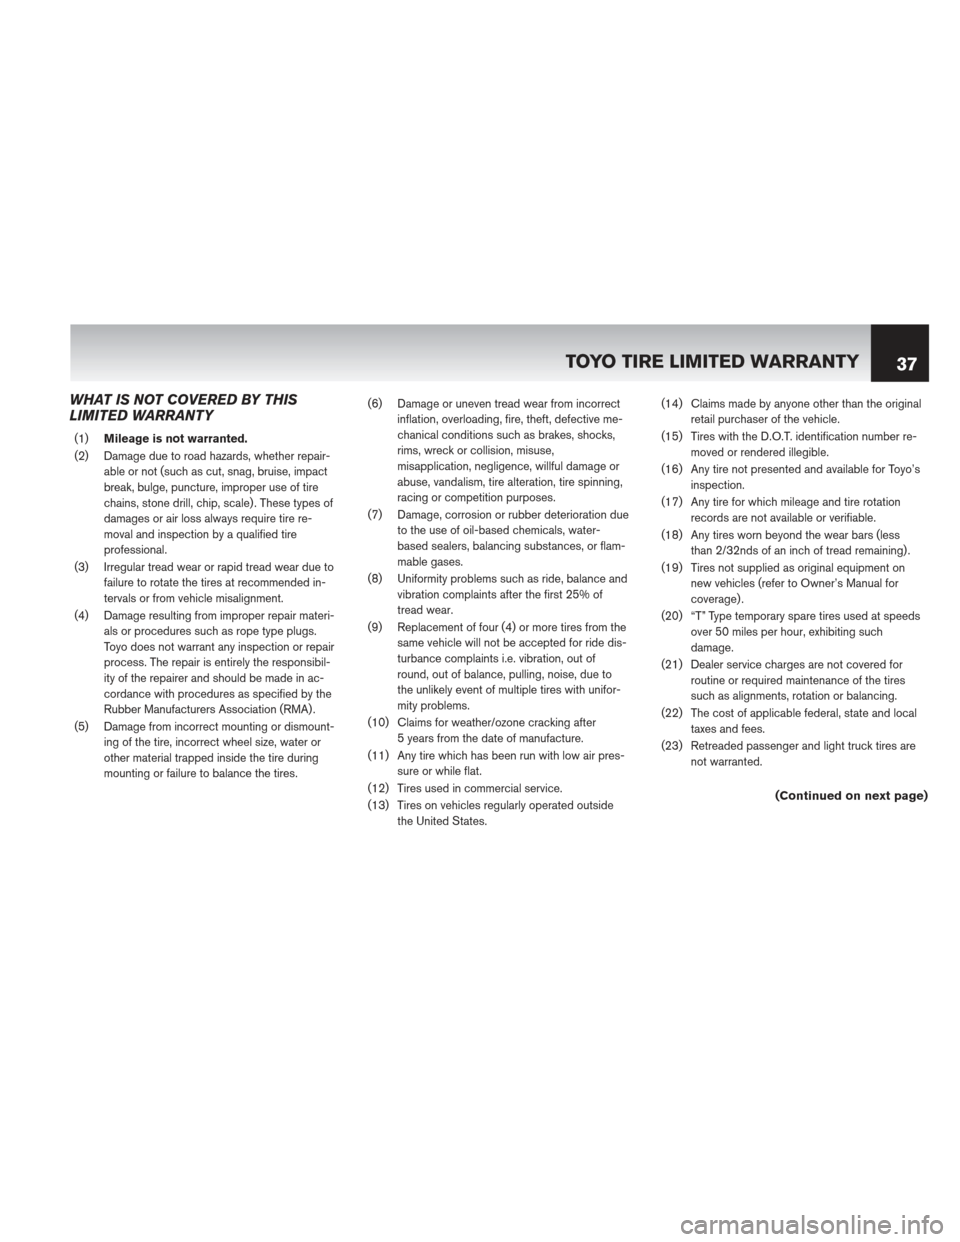 NISSAN FRONTIER 2013 D40 / 2.G Warranty Booklet WHAT IS NOT COVERED BY THIS
LIMITED WARRANTY
(1)Mileage is not warranted.
(2) Damage due to road hazards, whether repair- able or not (such as cut, snag, bruise, impact
break, bulge, puncture, imprope